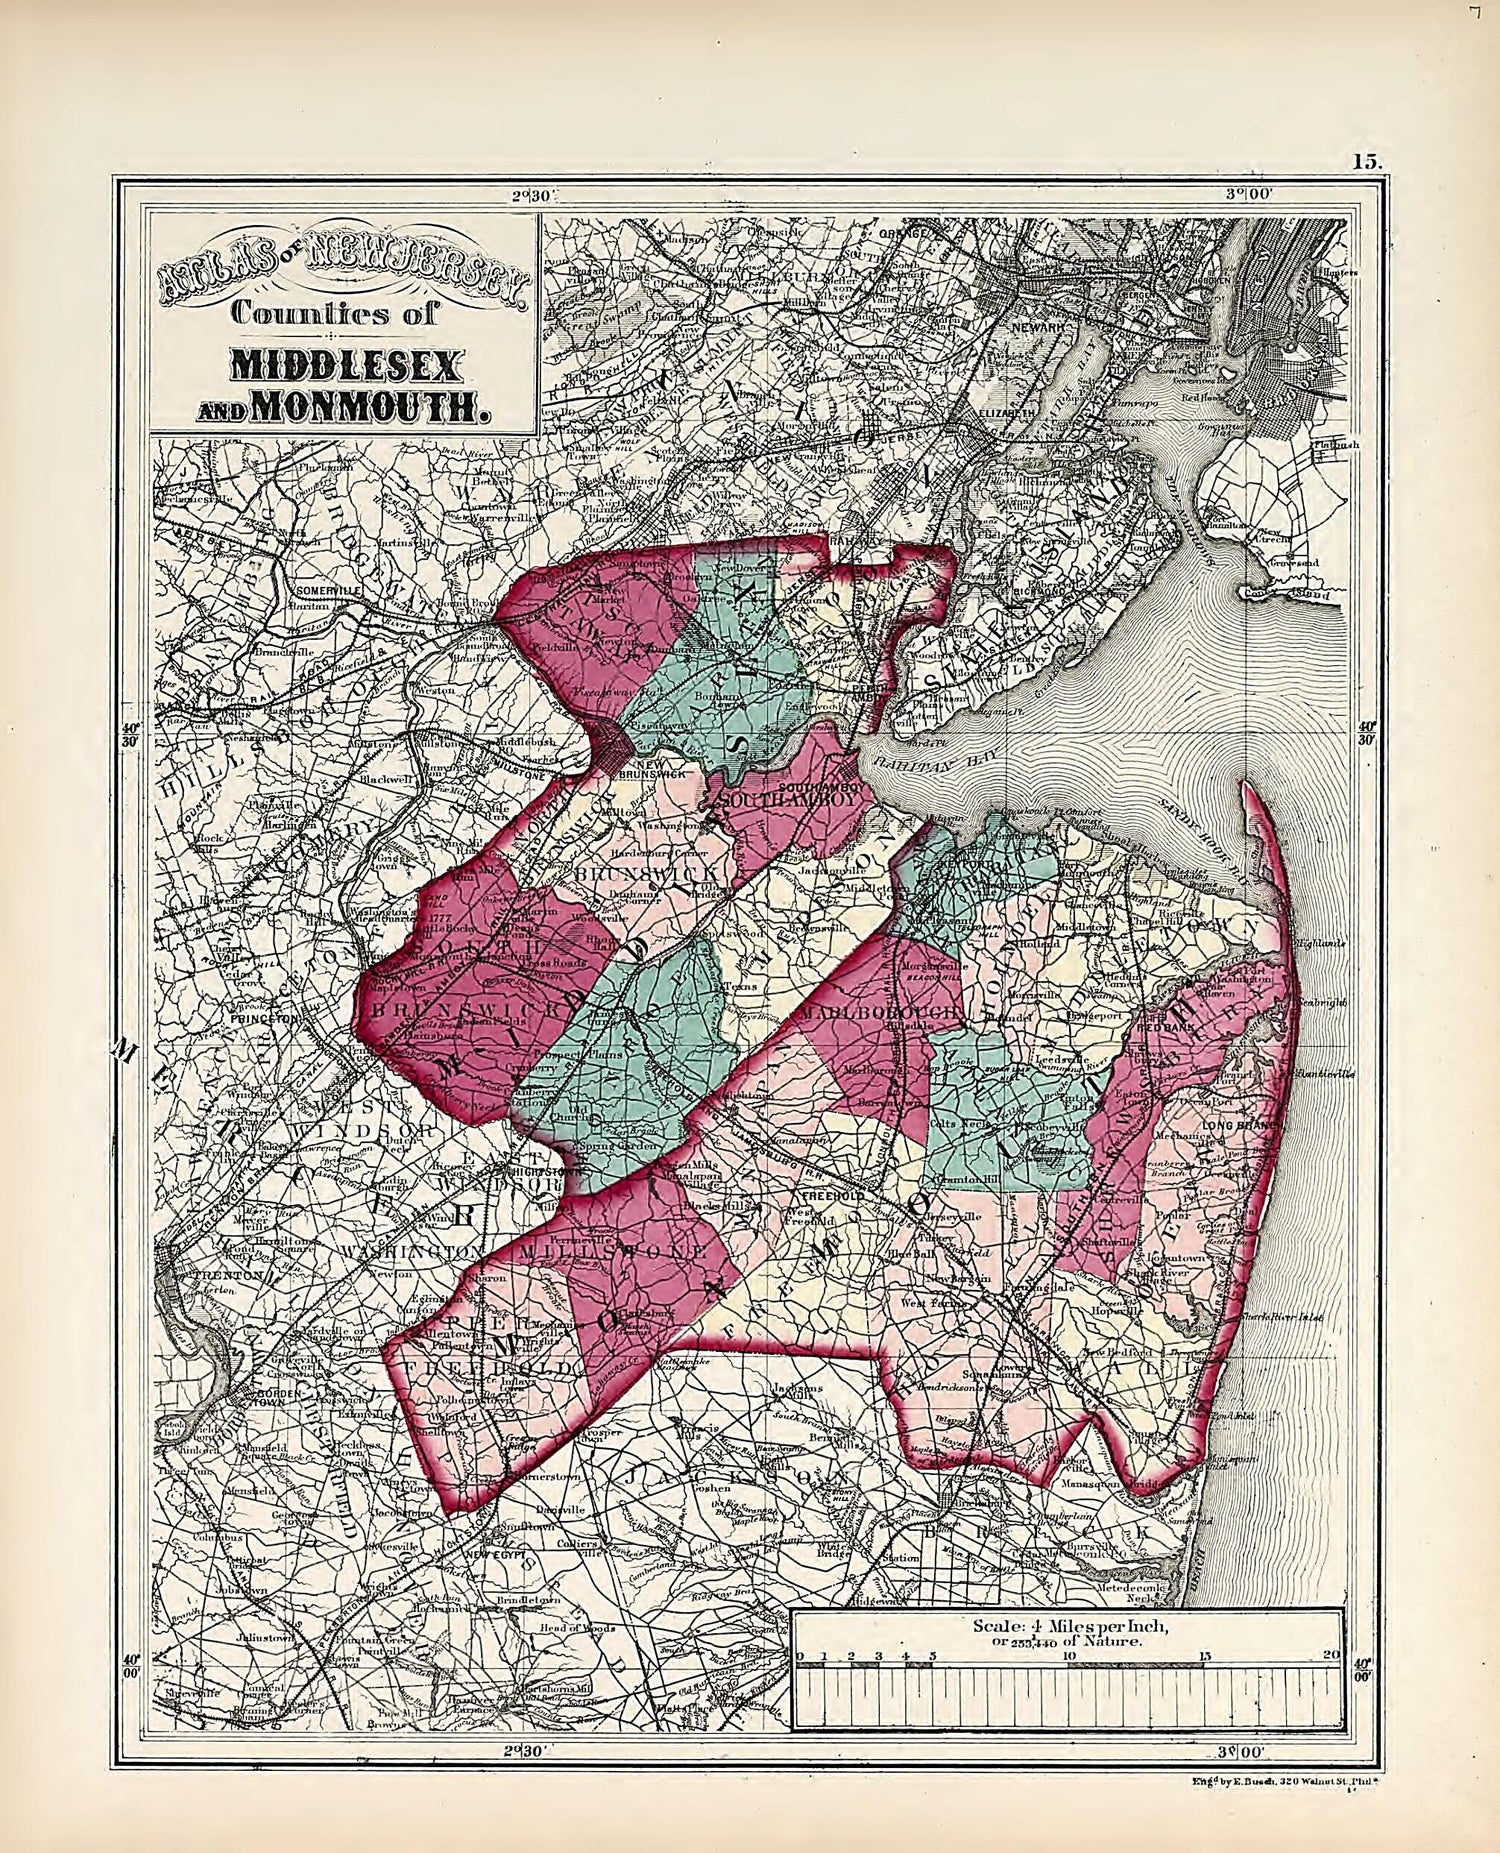 This old map of Counties of Middlesex and Monmouth from Atlas of the Late Township of Greenville, and the State of New Jersey from 1873 was created by Griffith Morgan Hopkins in 1873